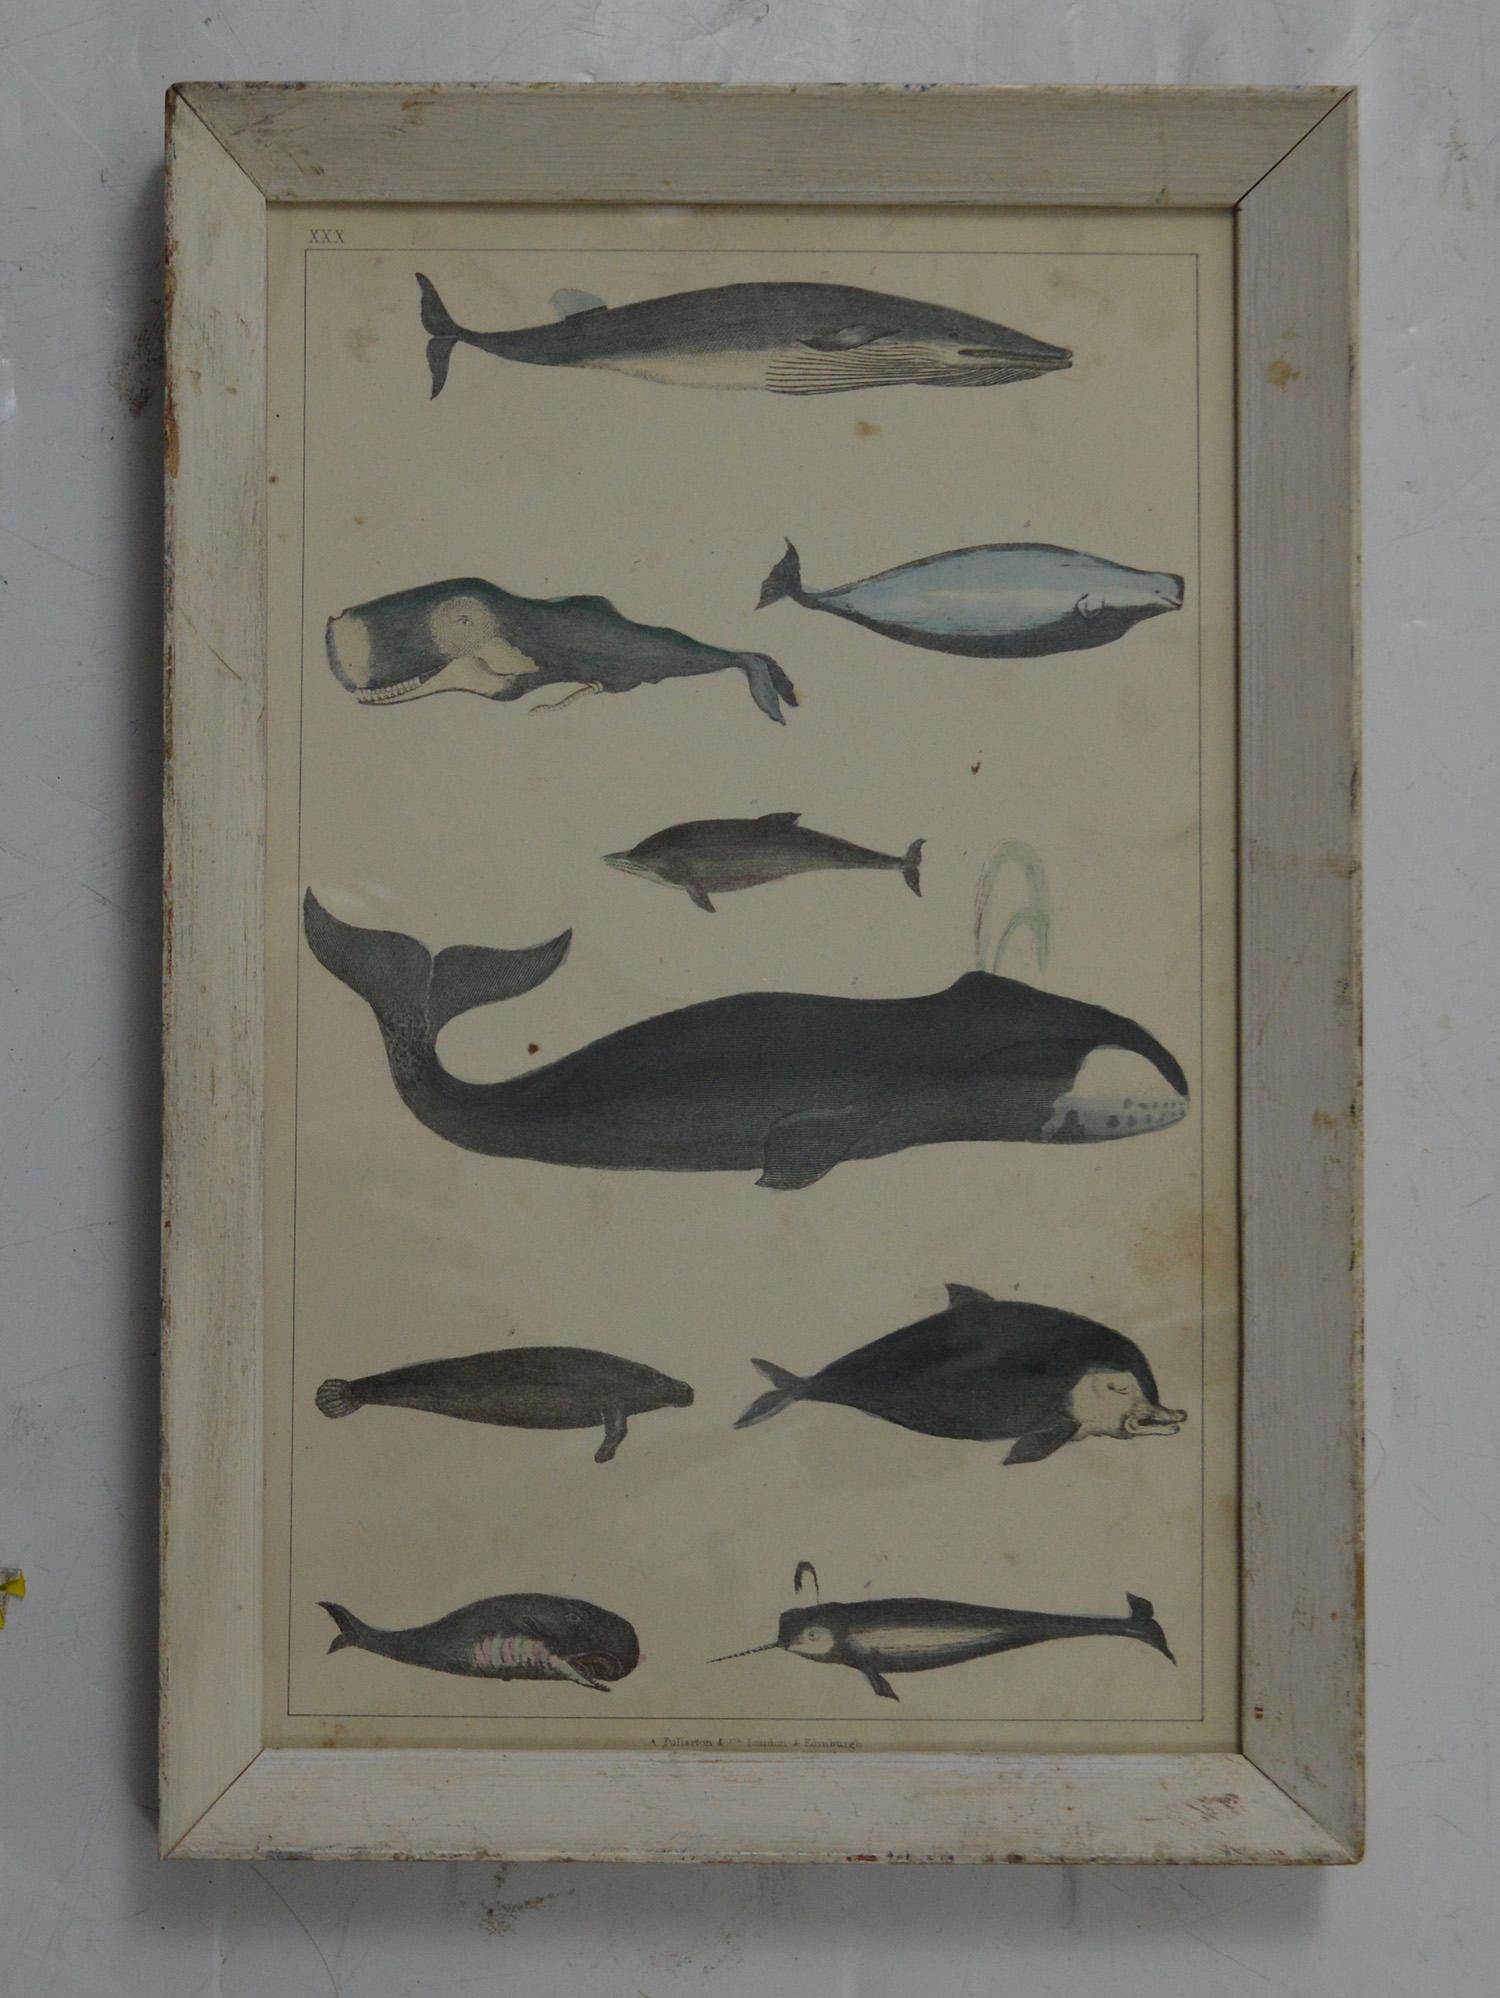 Great image of whales and dolphins presented in an antique painted wood frame.

Original hand colored lithograph after Cpt. Brown.

Published by Fullerton, 1847.